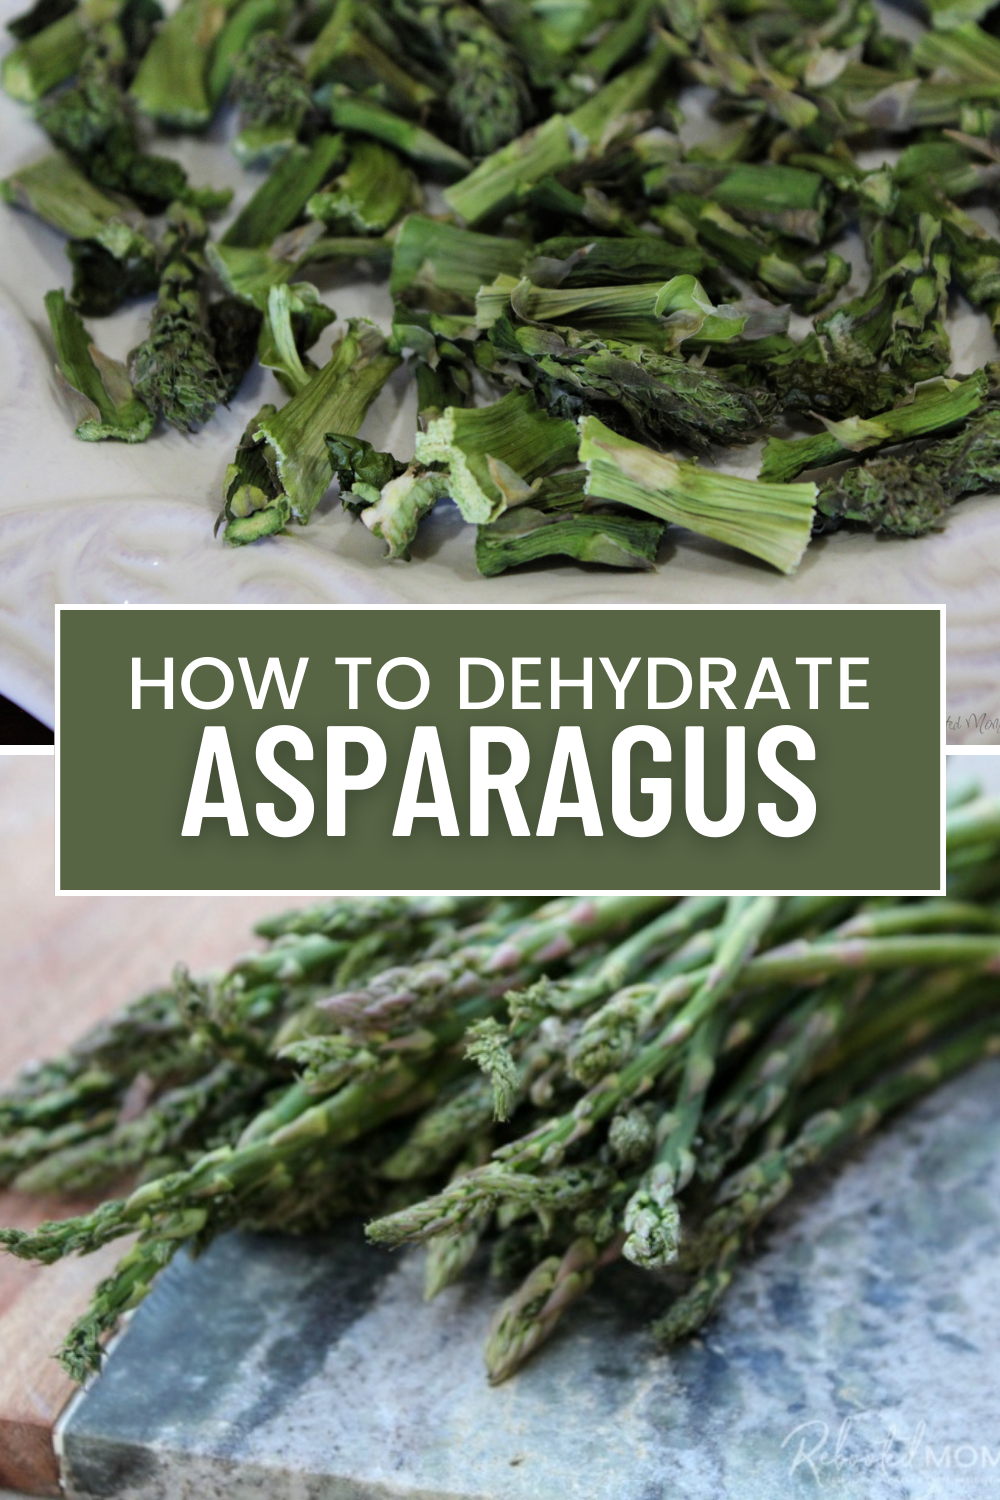 Dehydrate asparagus spears to preserve this beautiful green veggie all year long and transform it into a green powder or green salt to use in your recipes!  #asparagus #dehydrate #preserving #DIY